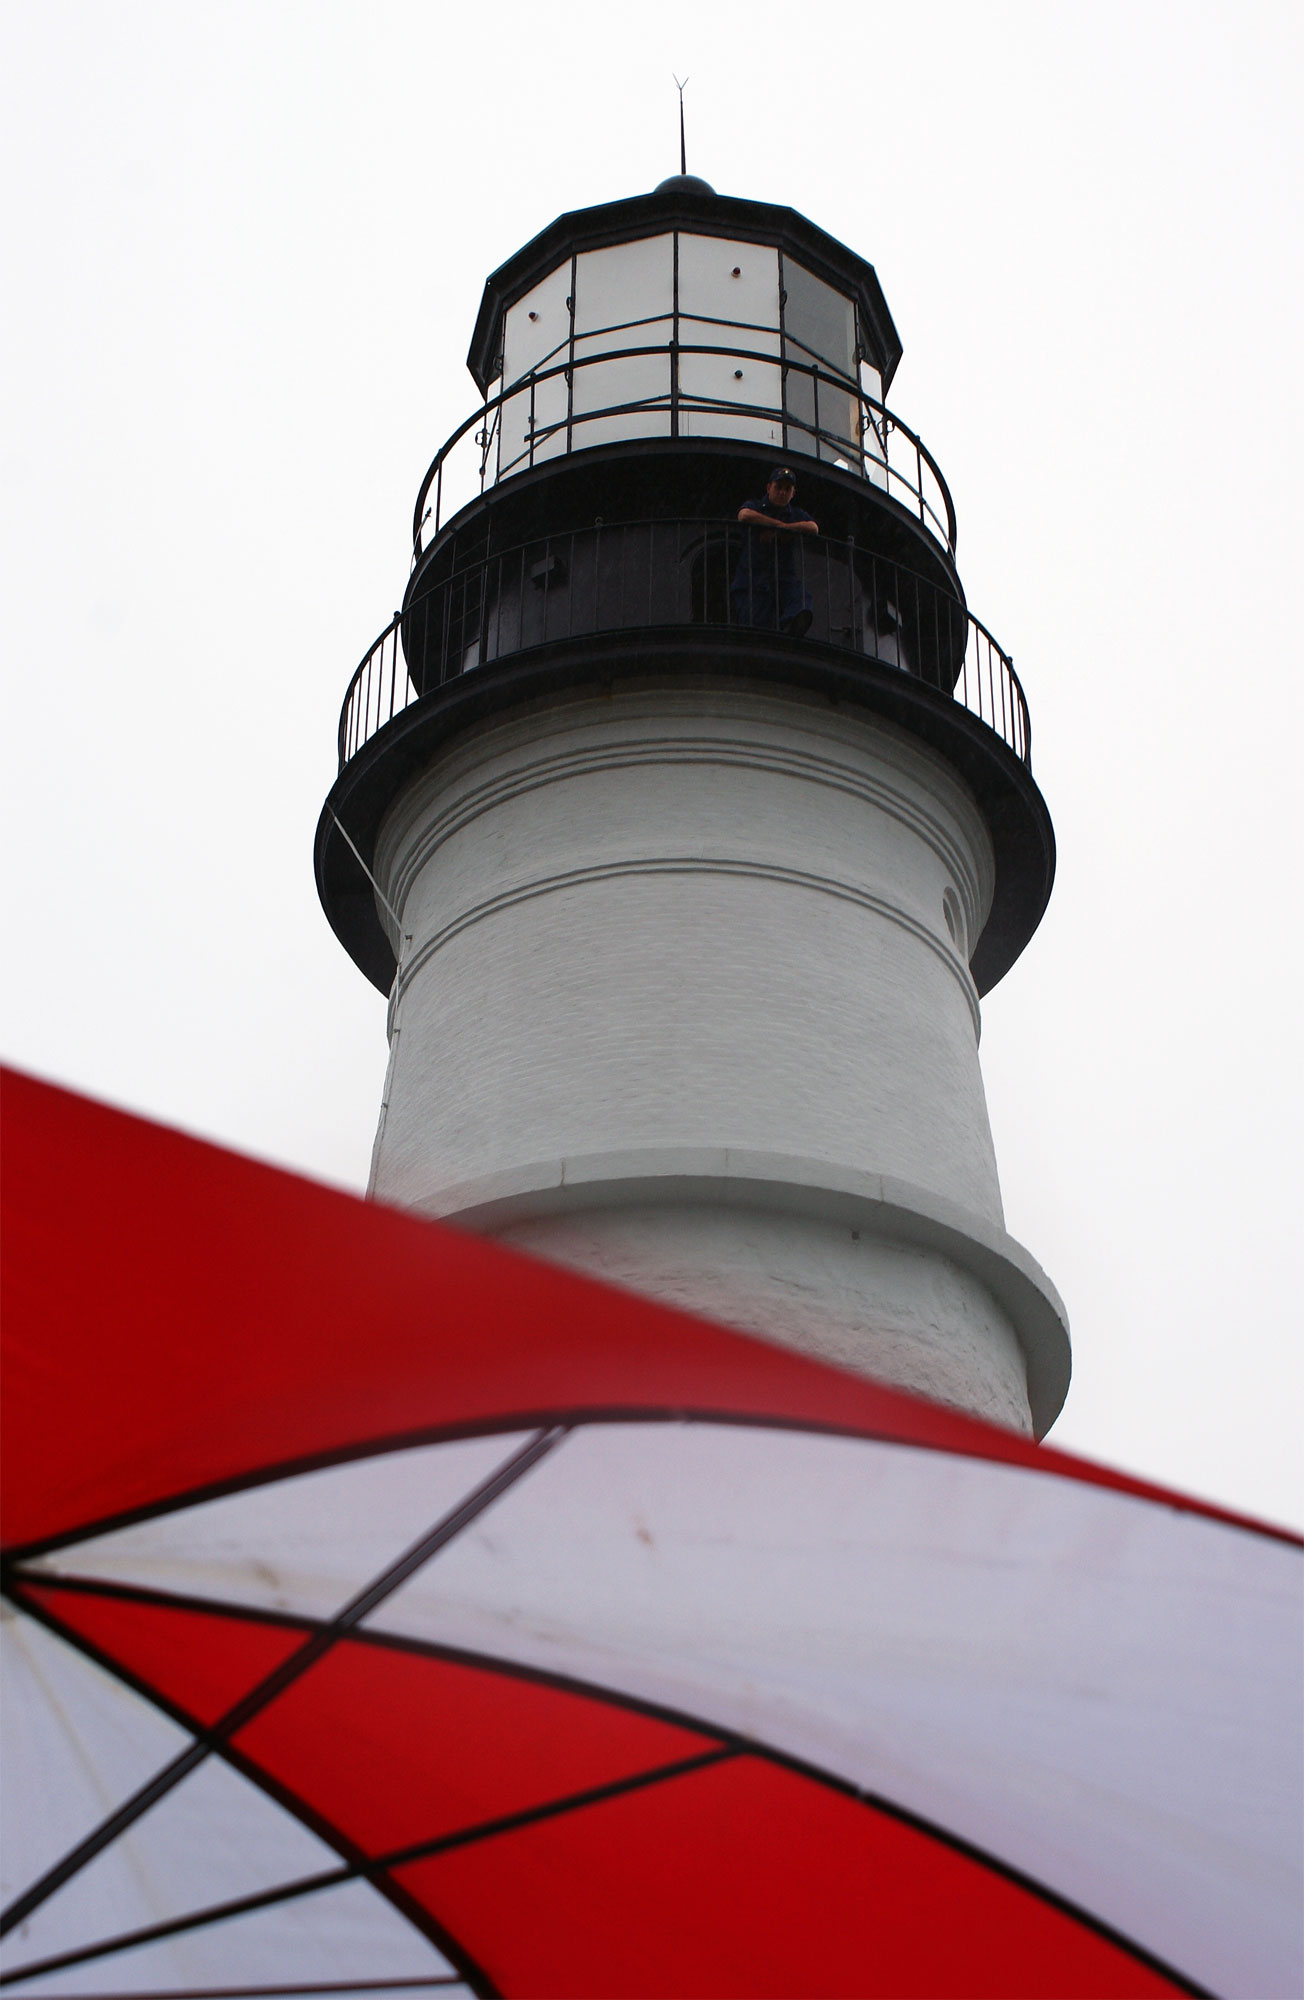 Rainy Day At Portland Headlight (user submitted)